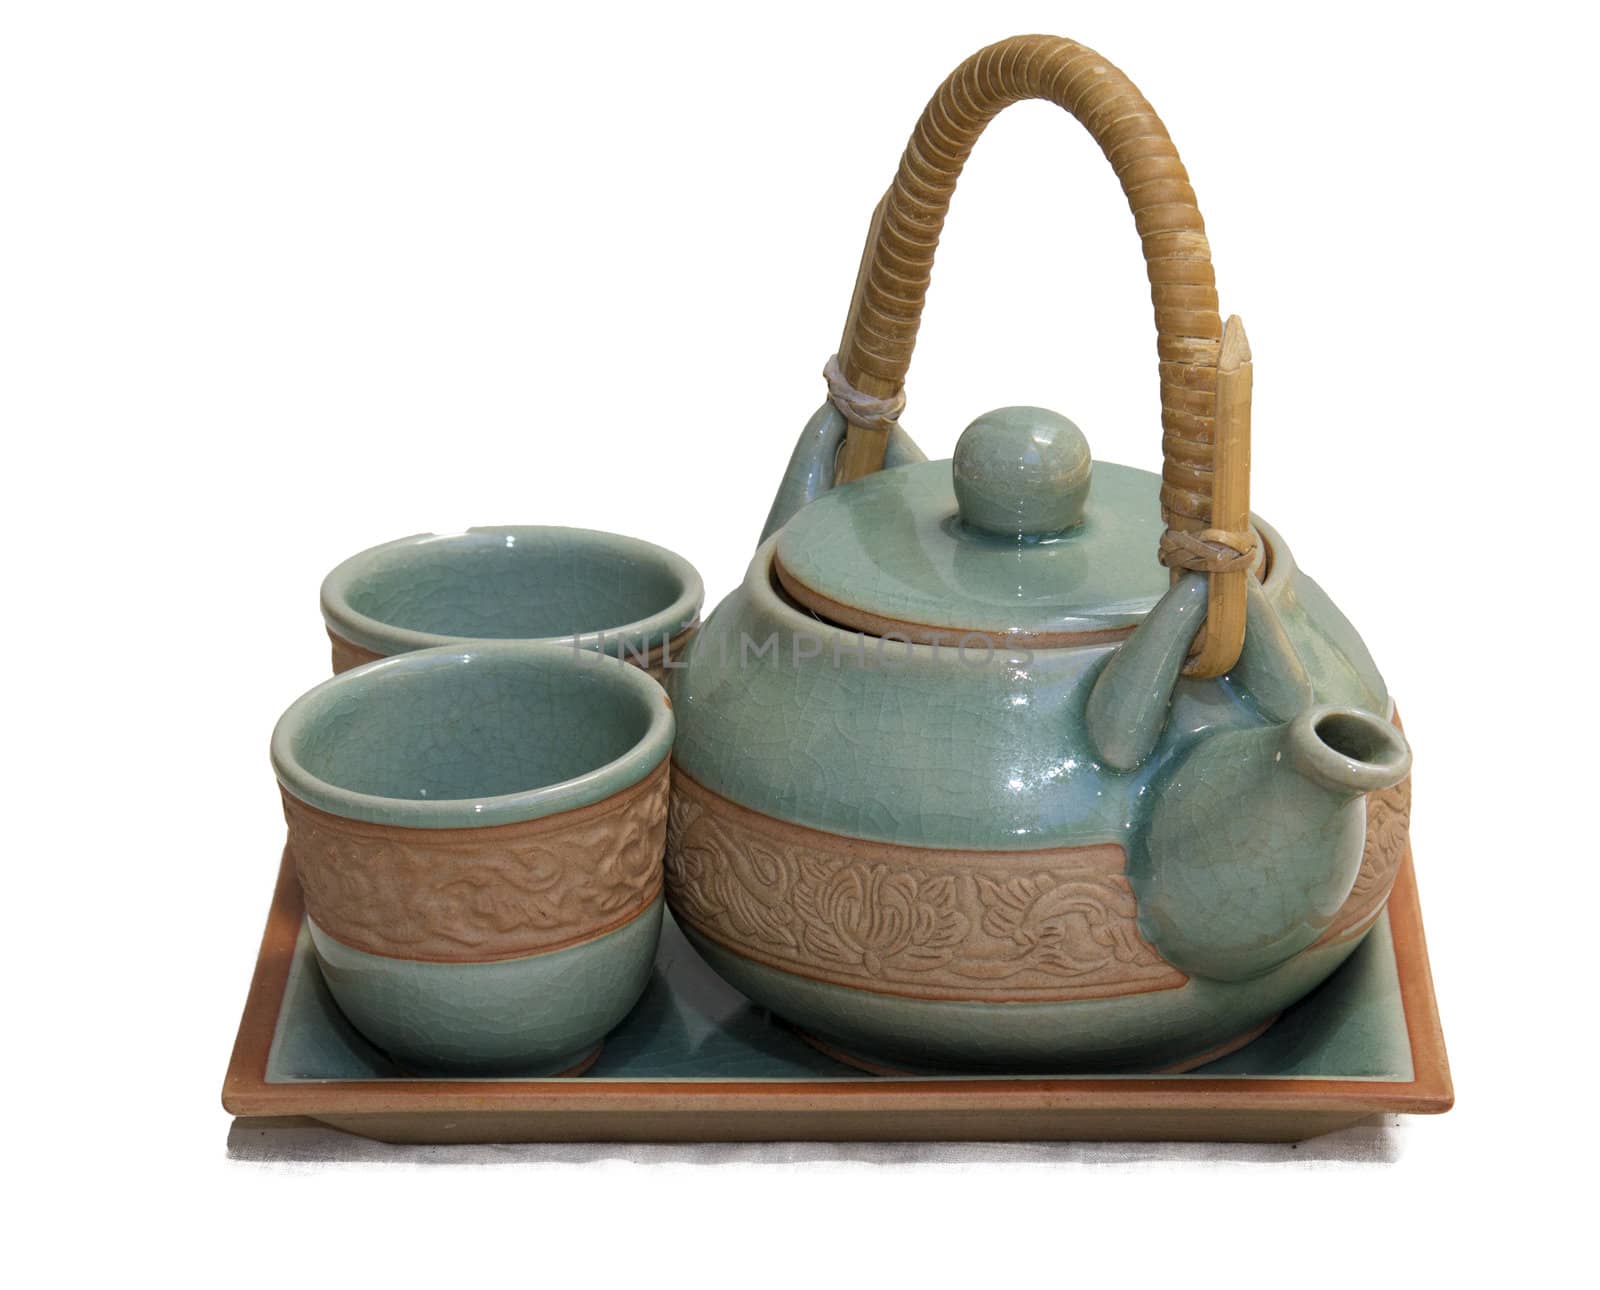 Chinese teapot and cups set